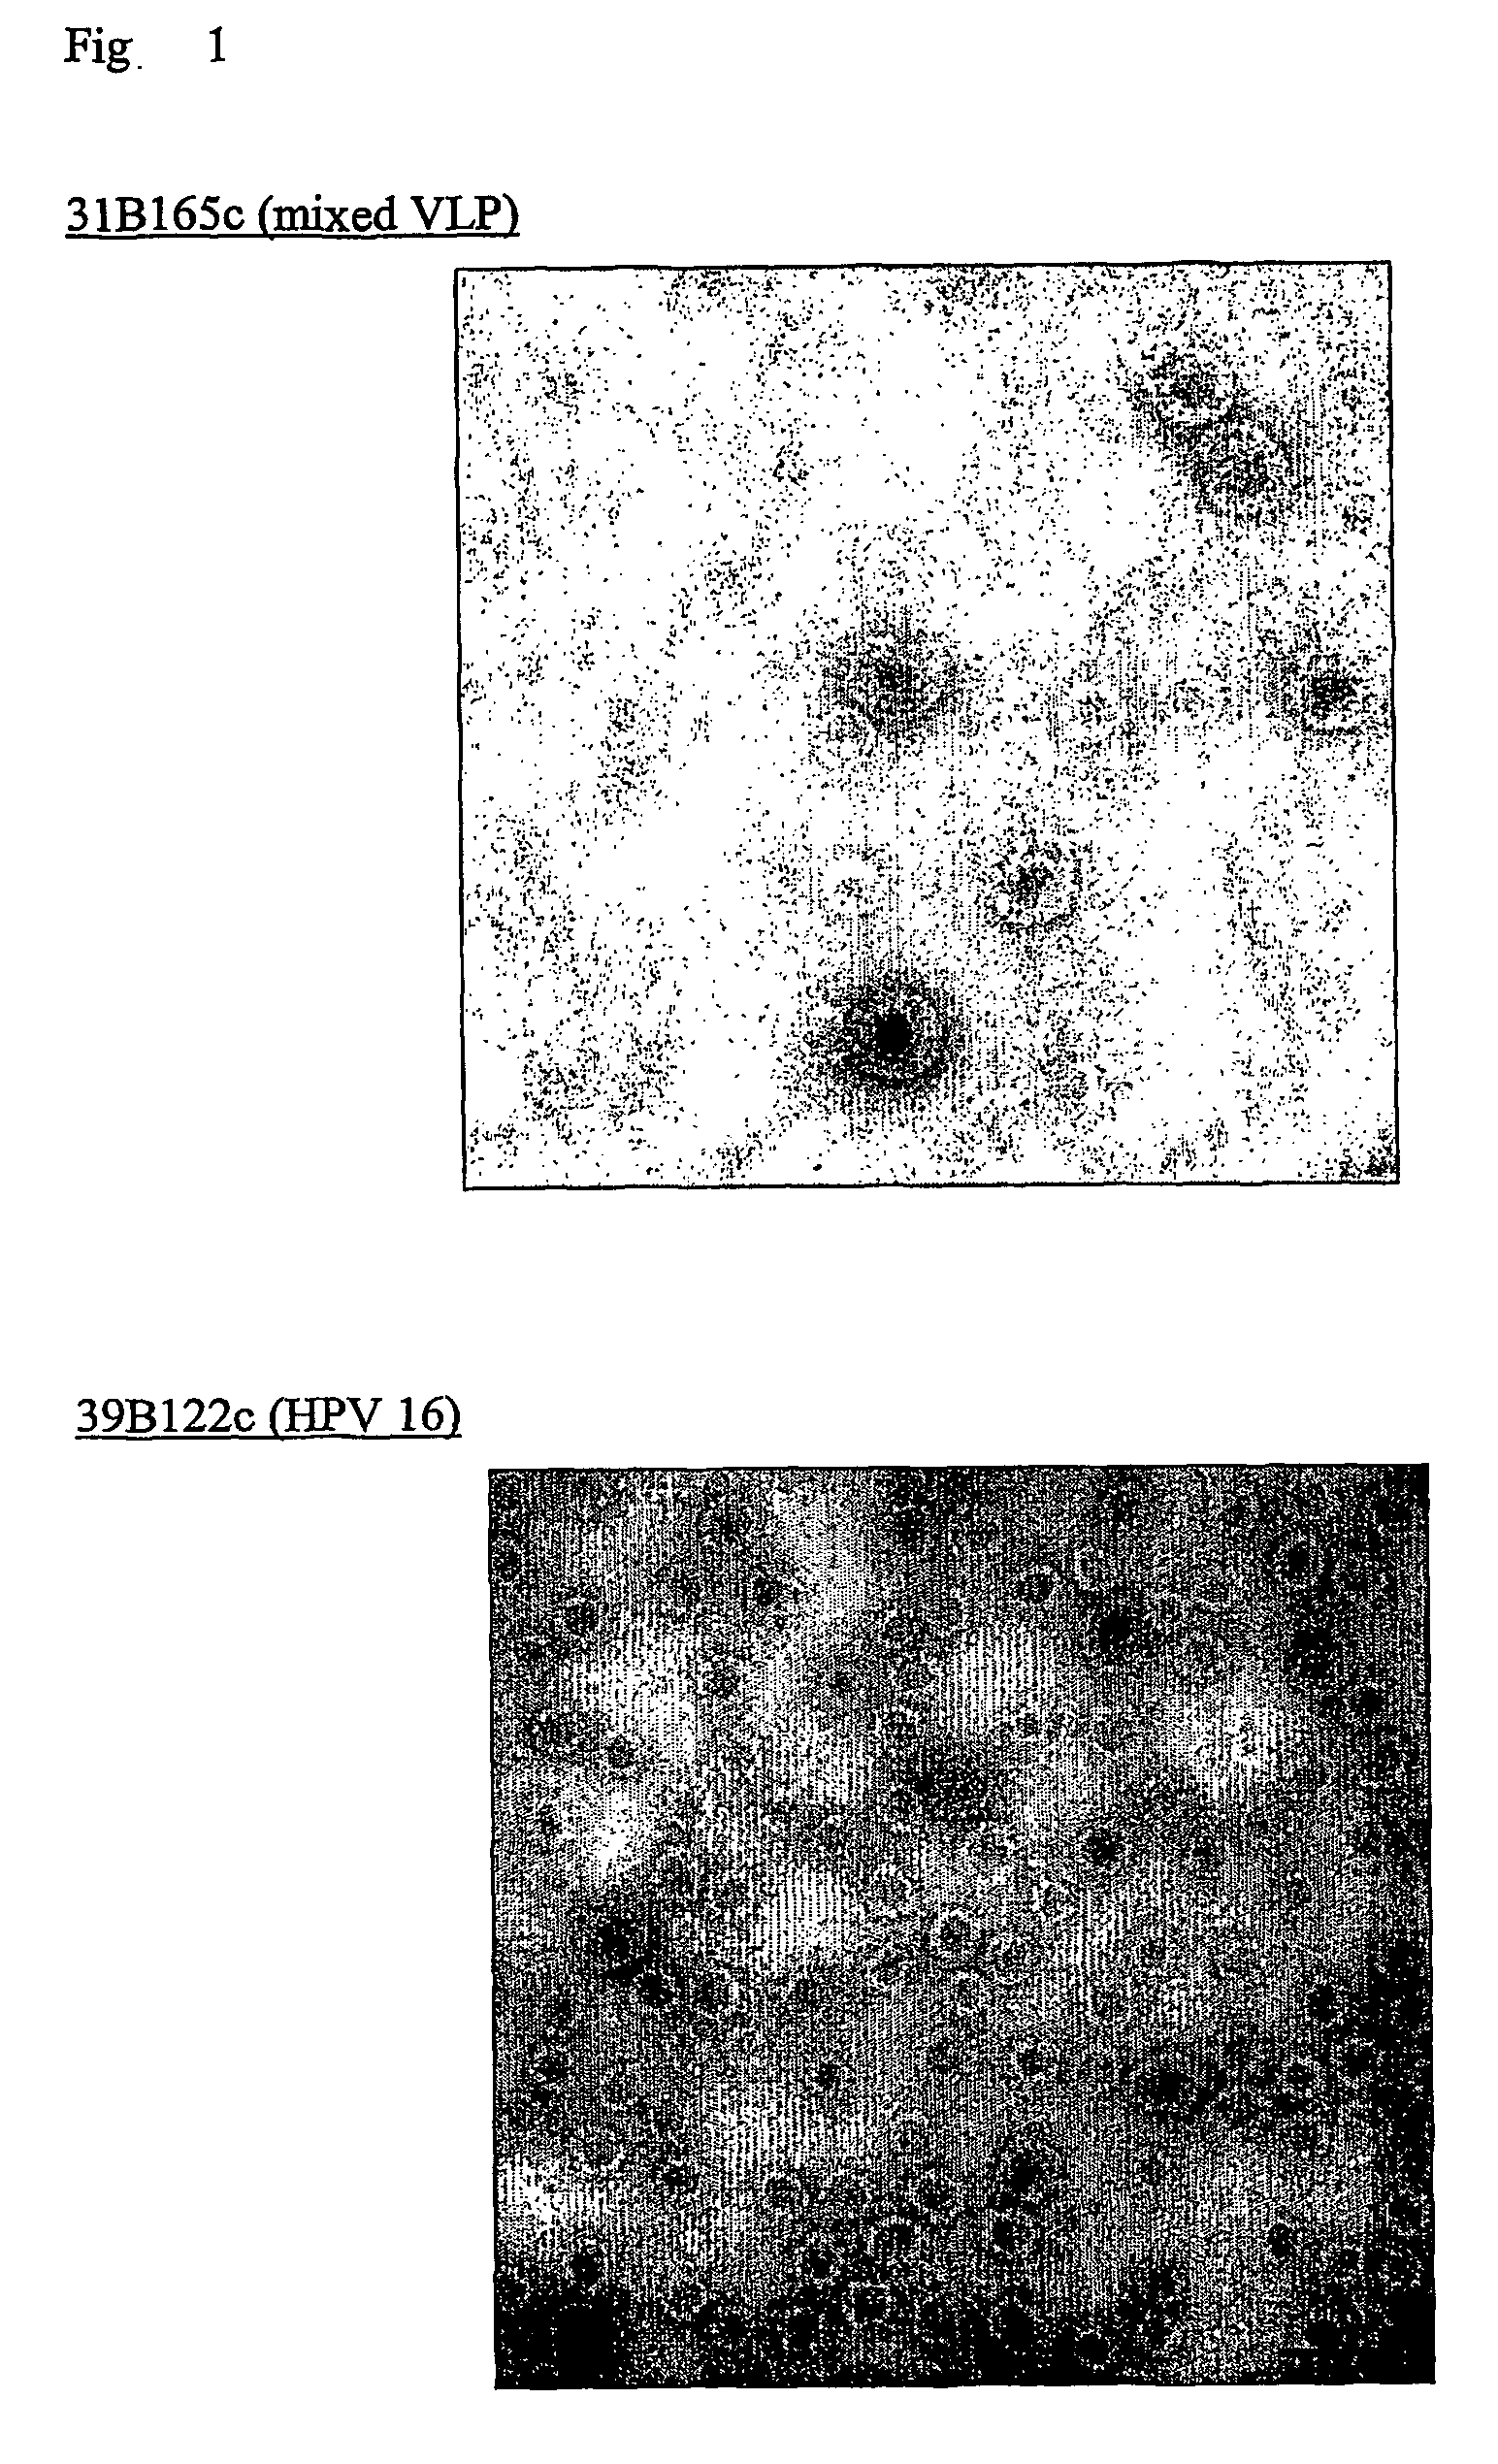 Mixed Virus-like particles